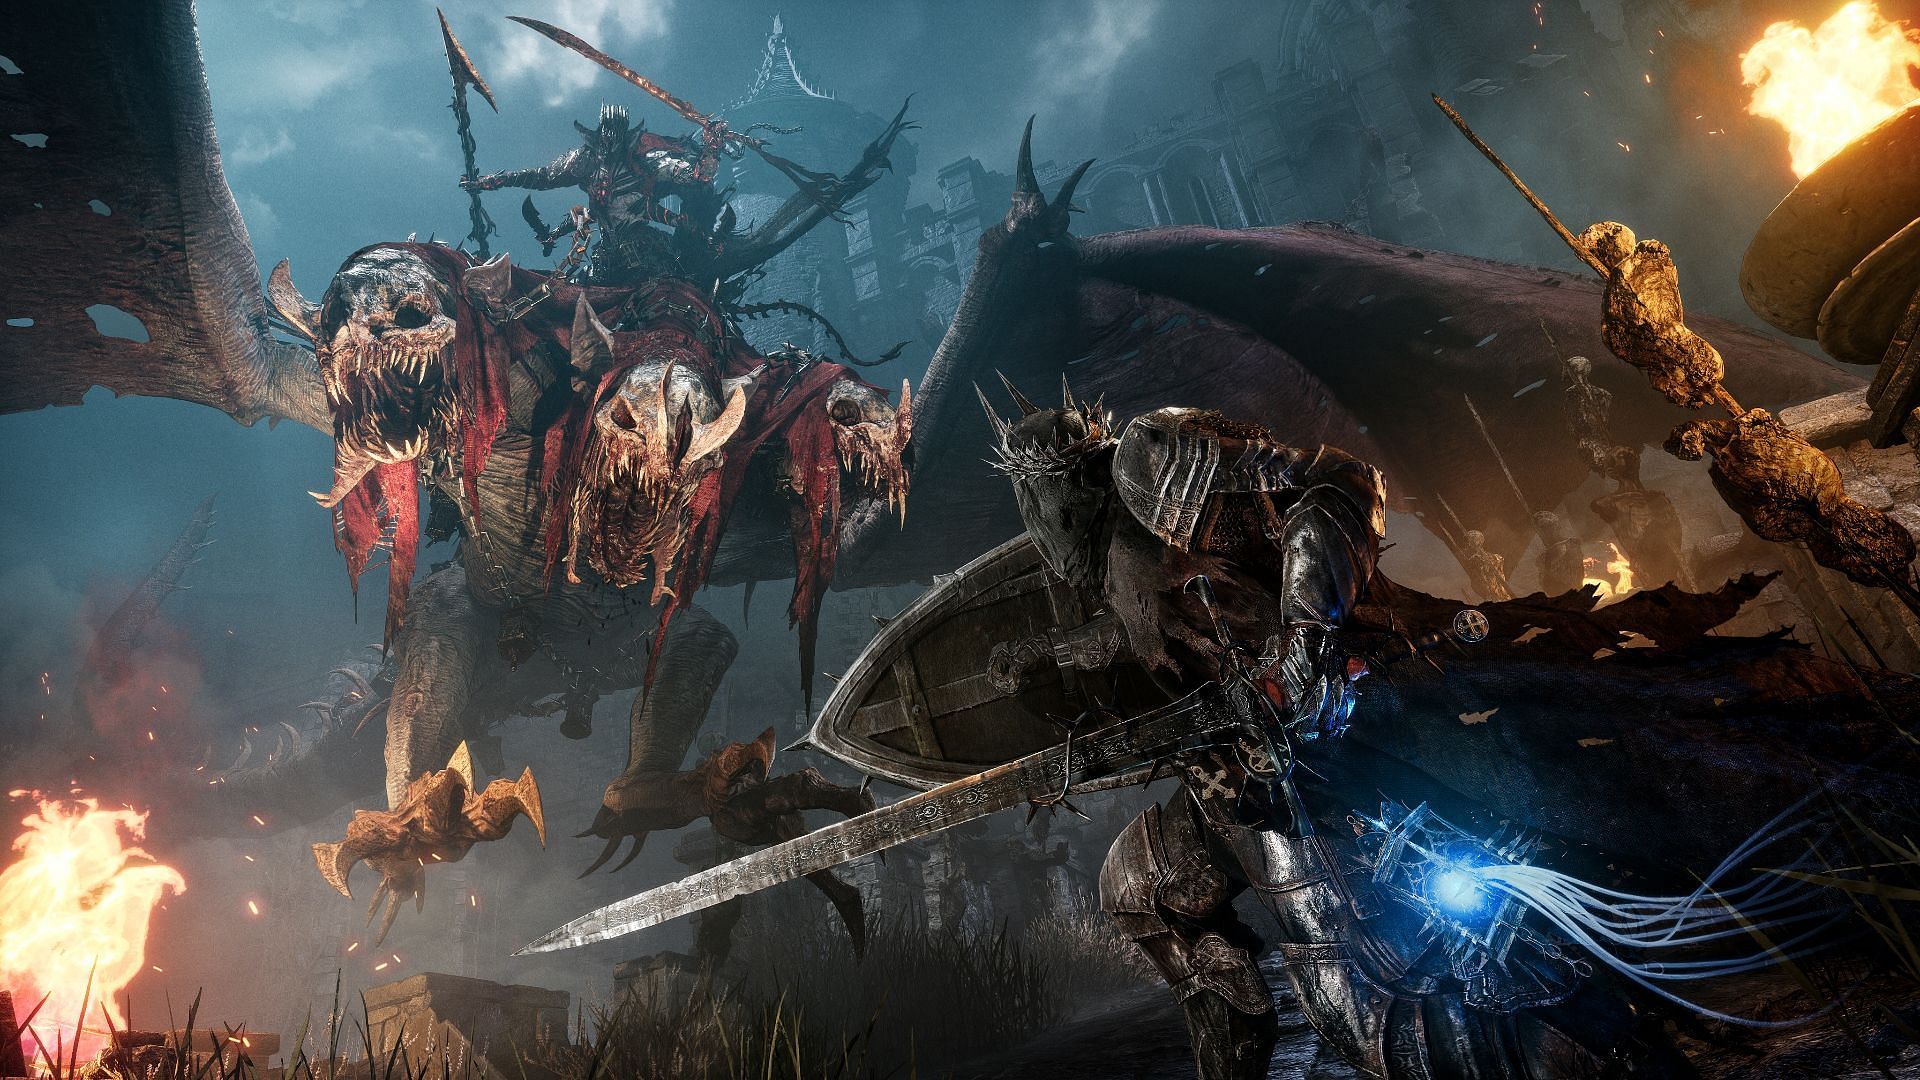 The Dark Crusader is featured heavily in The Lords of the Fallen